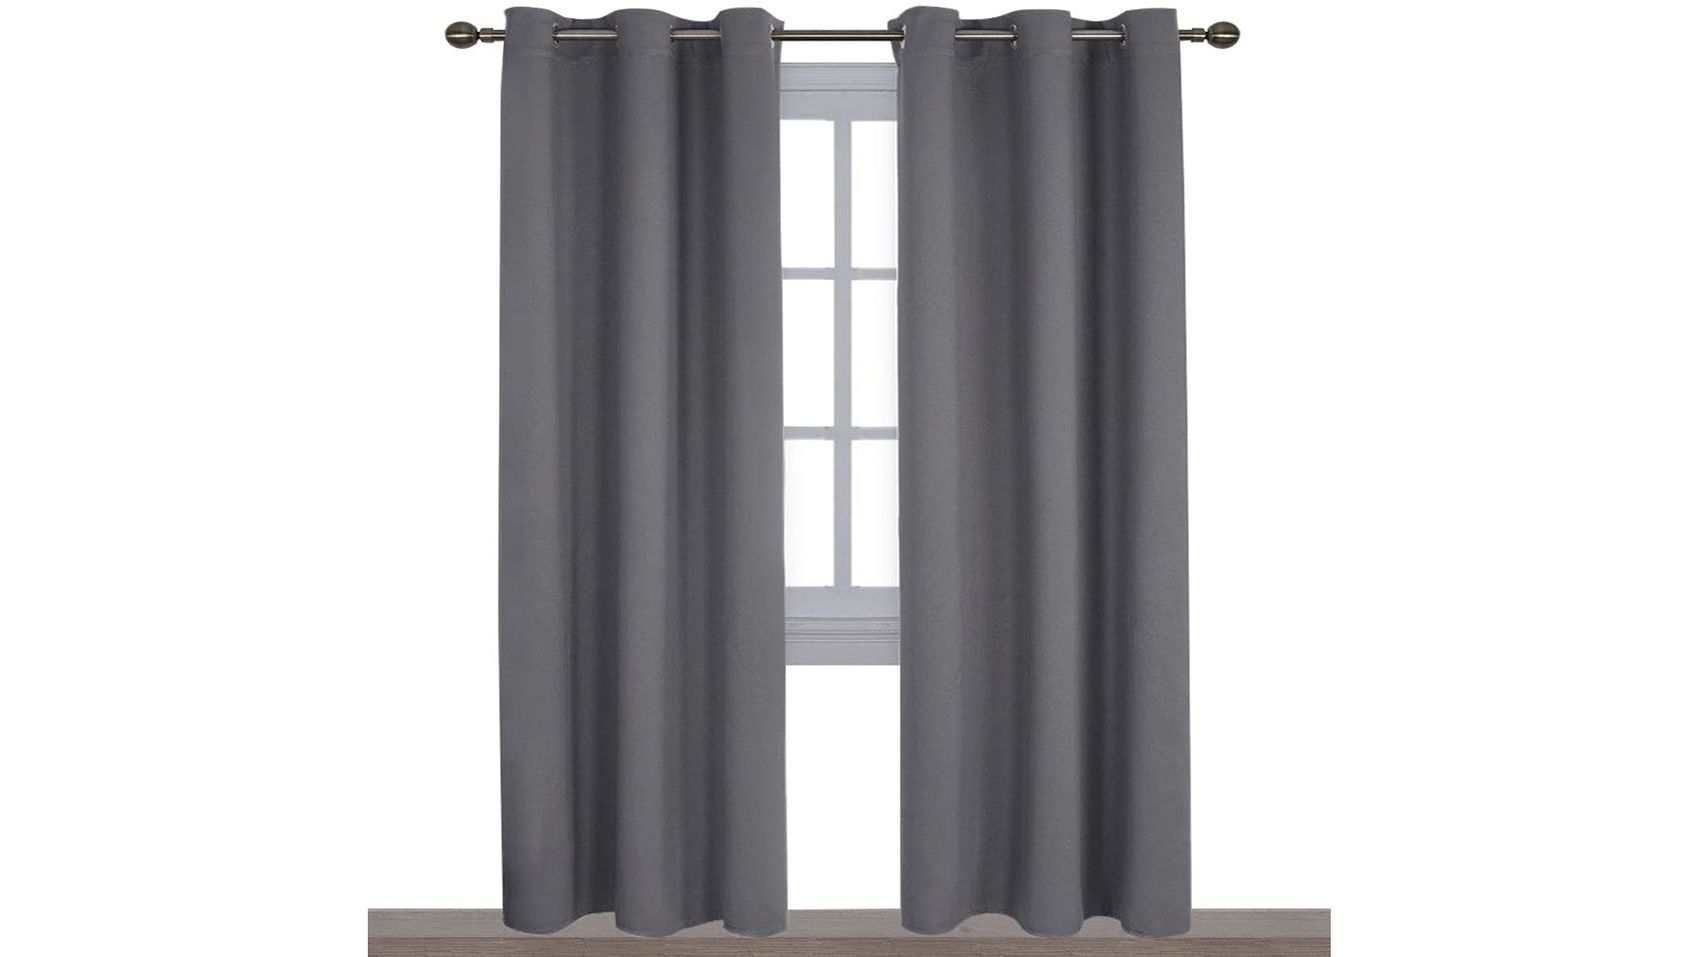 Nicetown Custom Blackout Curtains Collection